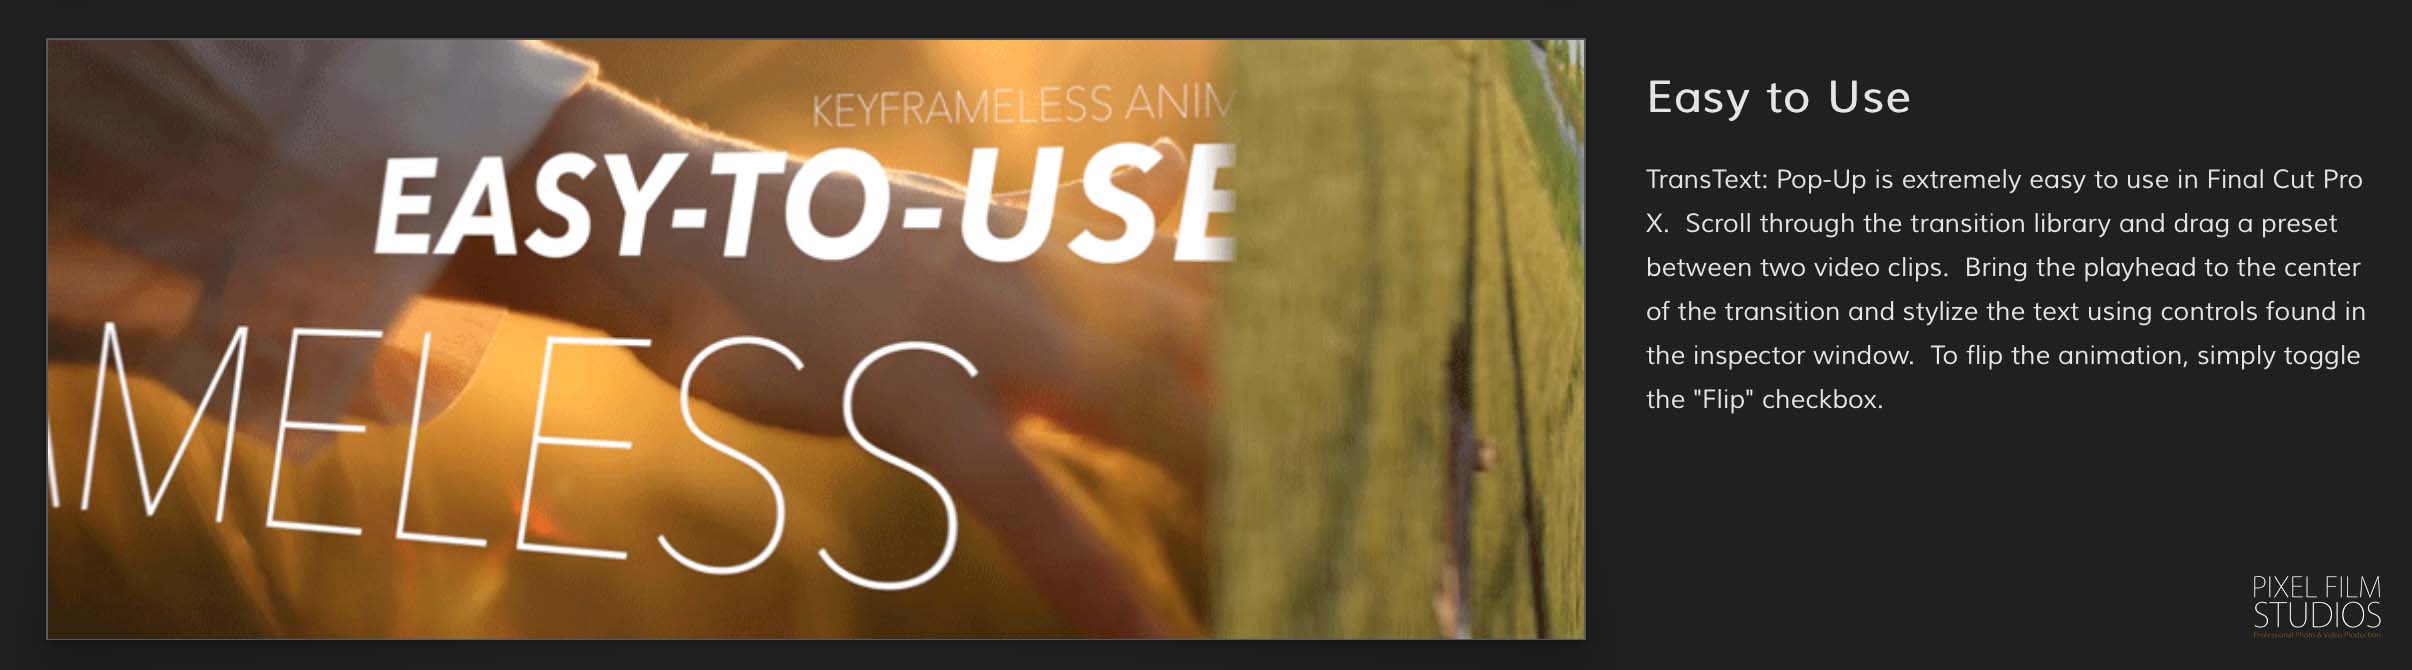 TransText Popup Transition from Pixel Film Studios for Final Cut Pro X